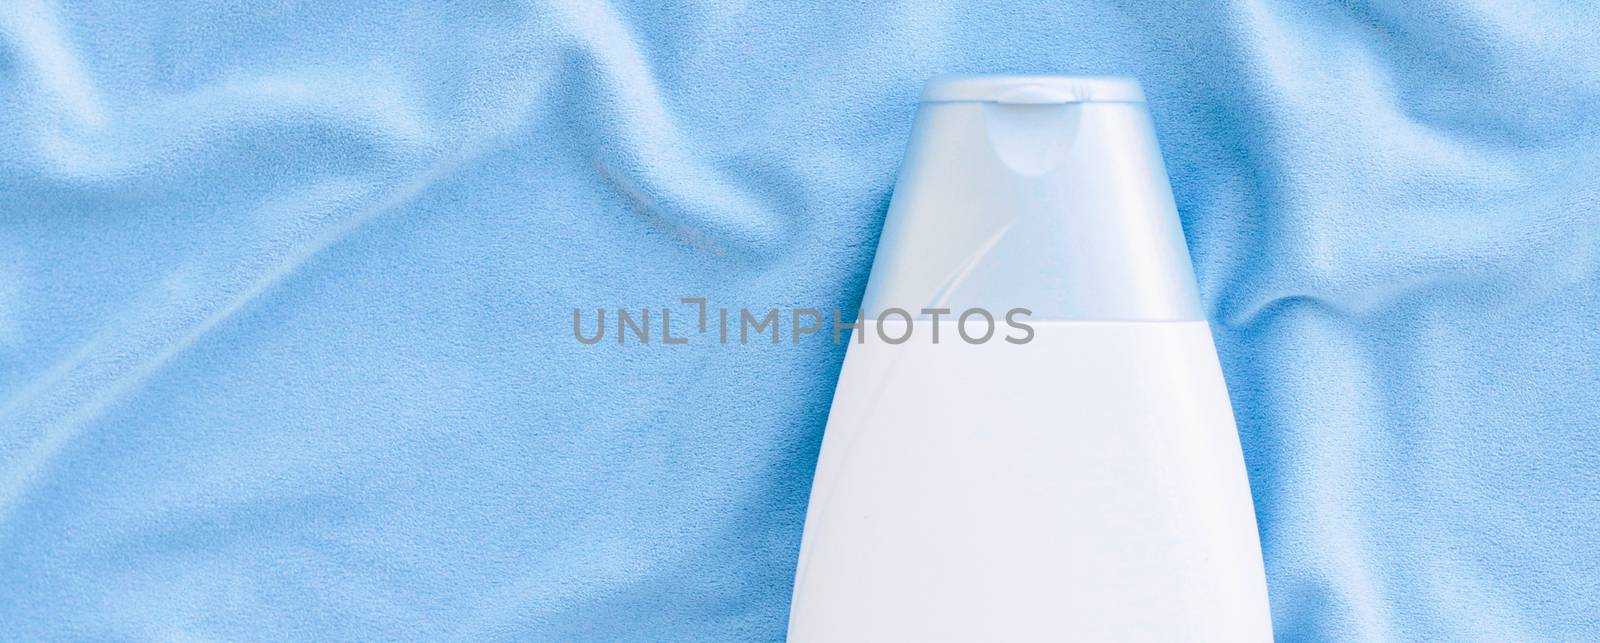 Blank label shampoo bottle or shower gel mockup on blue silk background, beauty product and body care cosmetics, flatlay